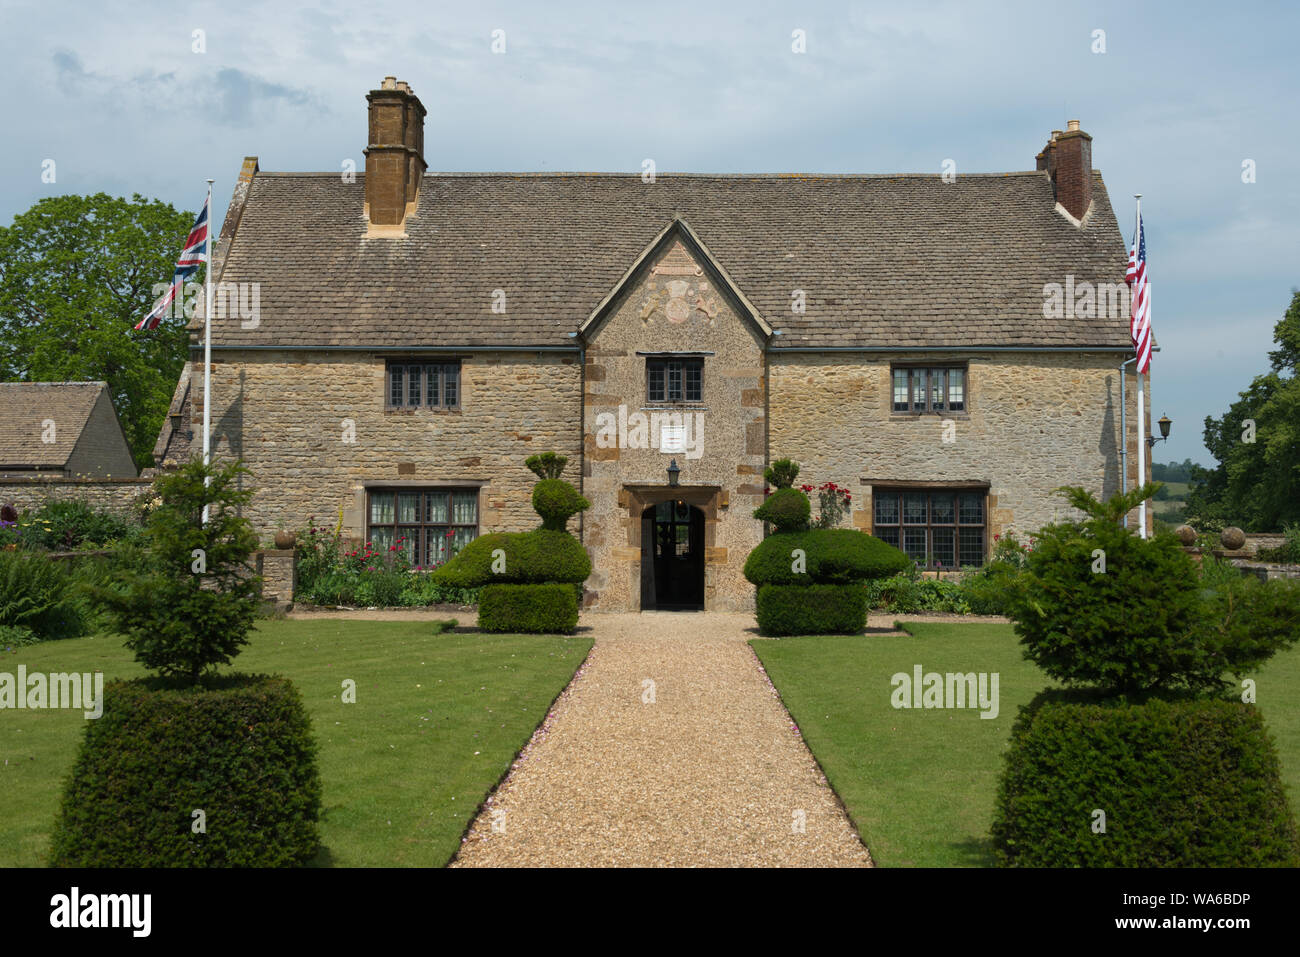 Sulgrave Manor (rear view), near Banbury, Northamptonshire, UK - Home of the ancesters of George Washington - first US President Stock Photo